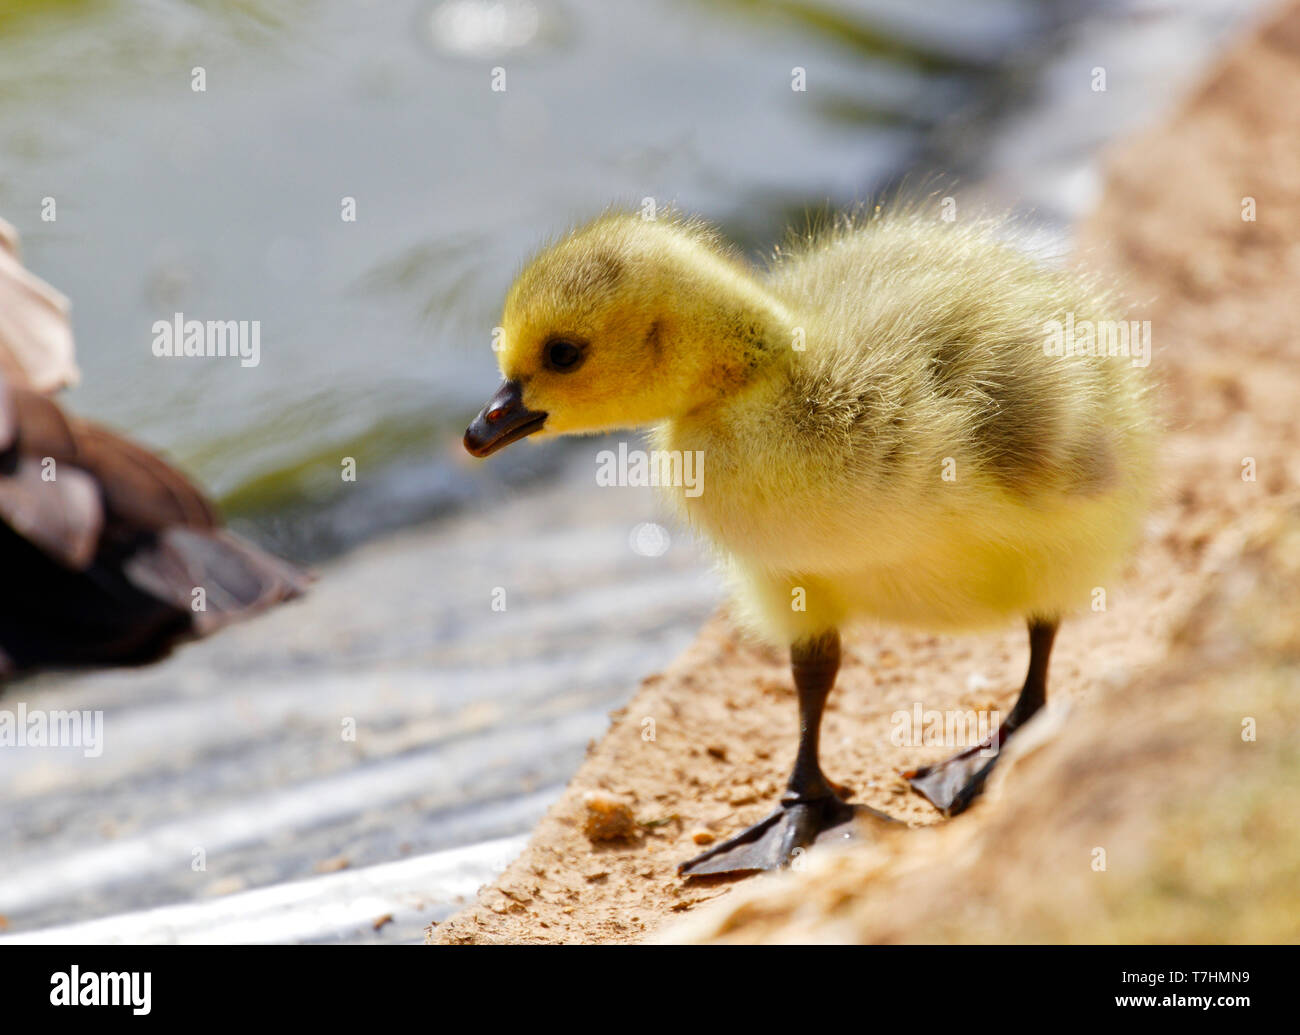 Canada goose chick Banque D'Images